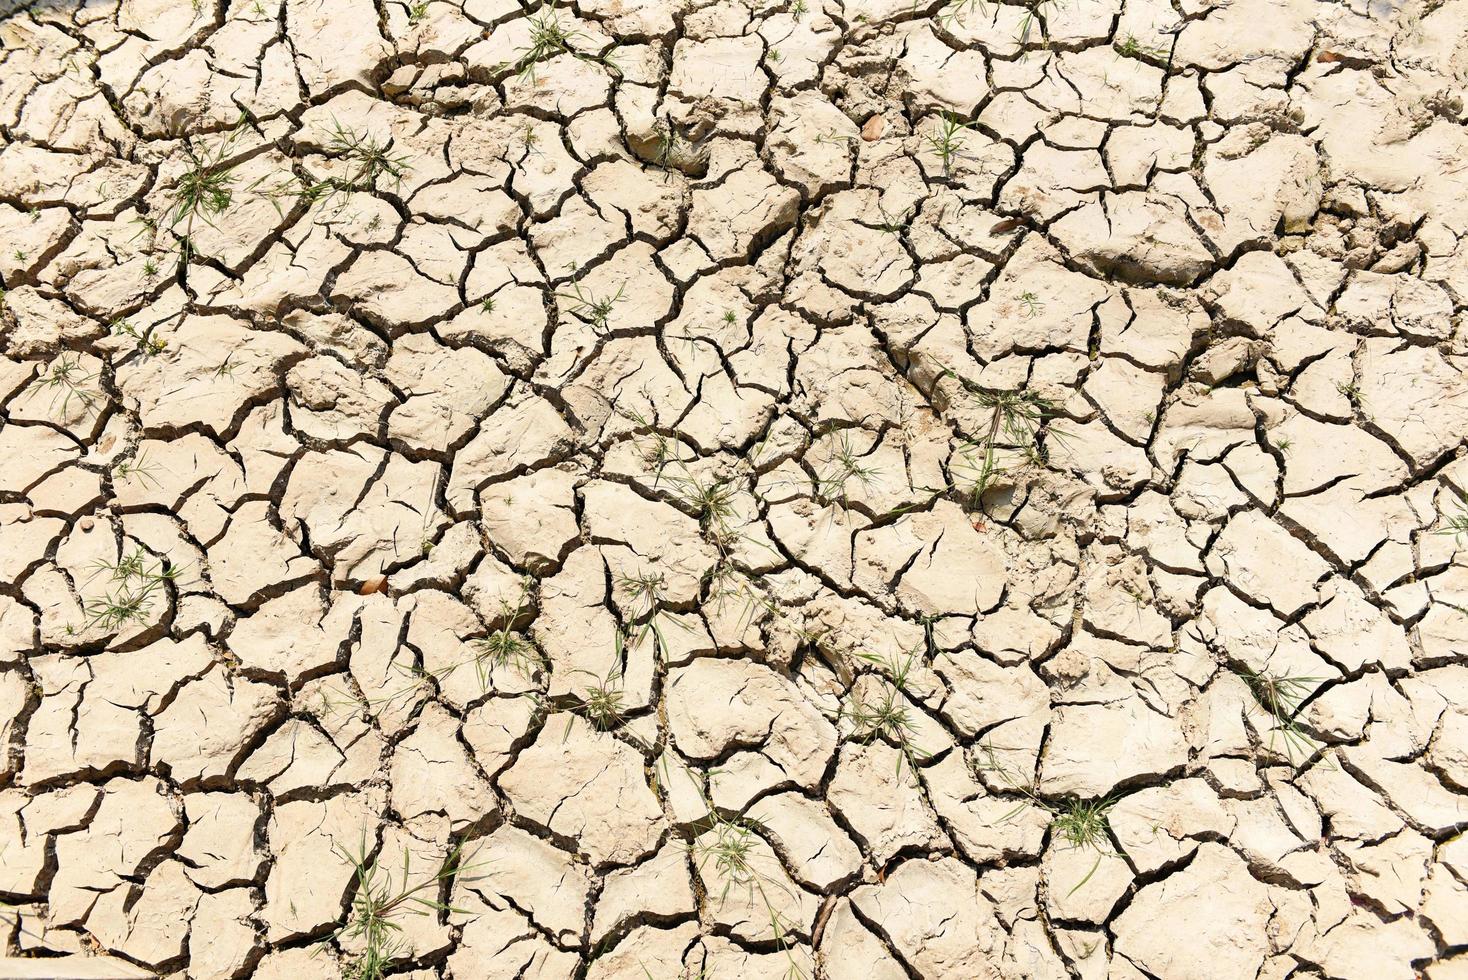 Global warming concept, Cracked soil arid land with dry and cracked ground desert texture background photo